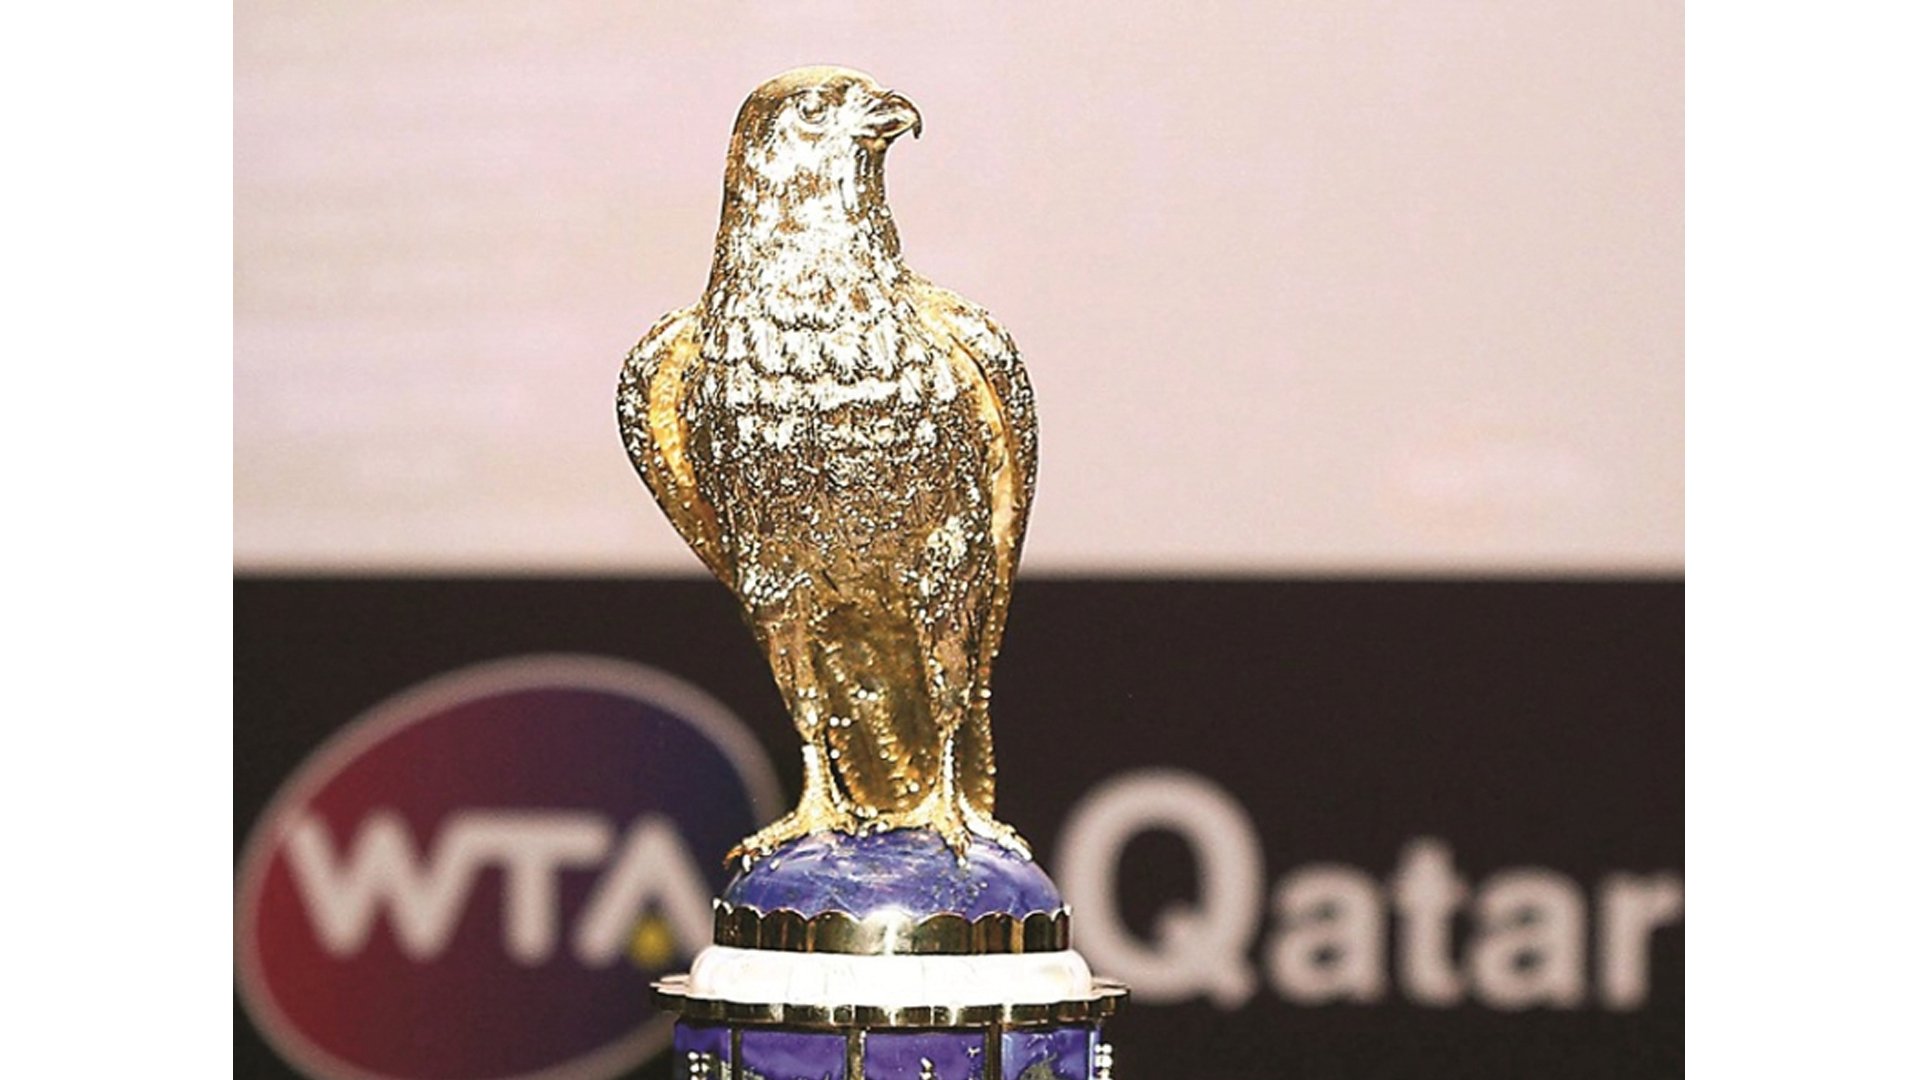 Qatar Total Open 2021 Cup